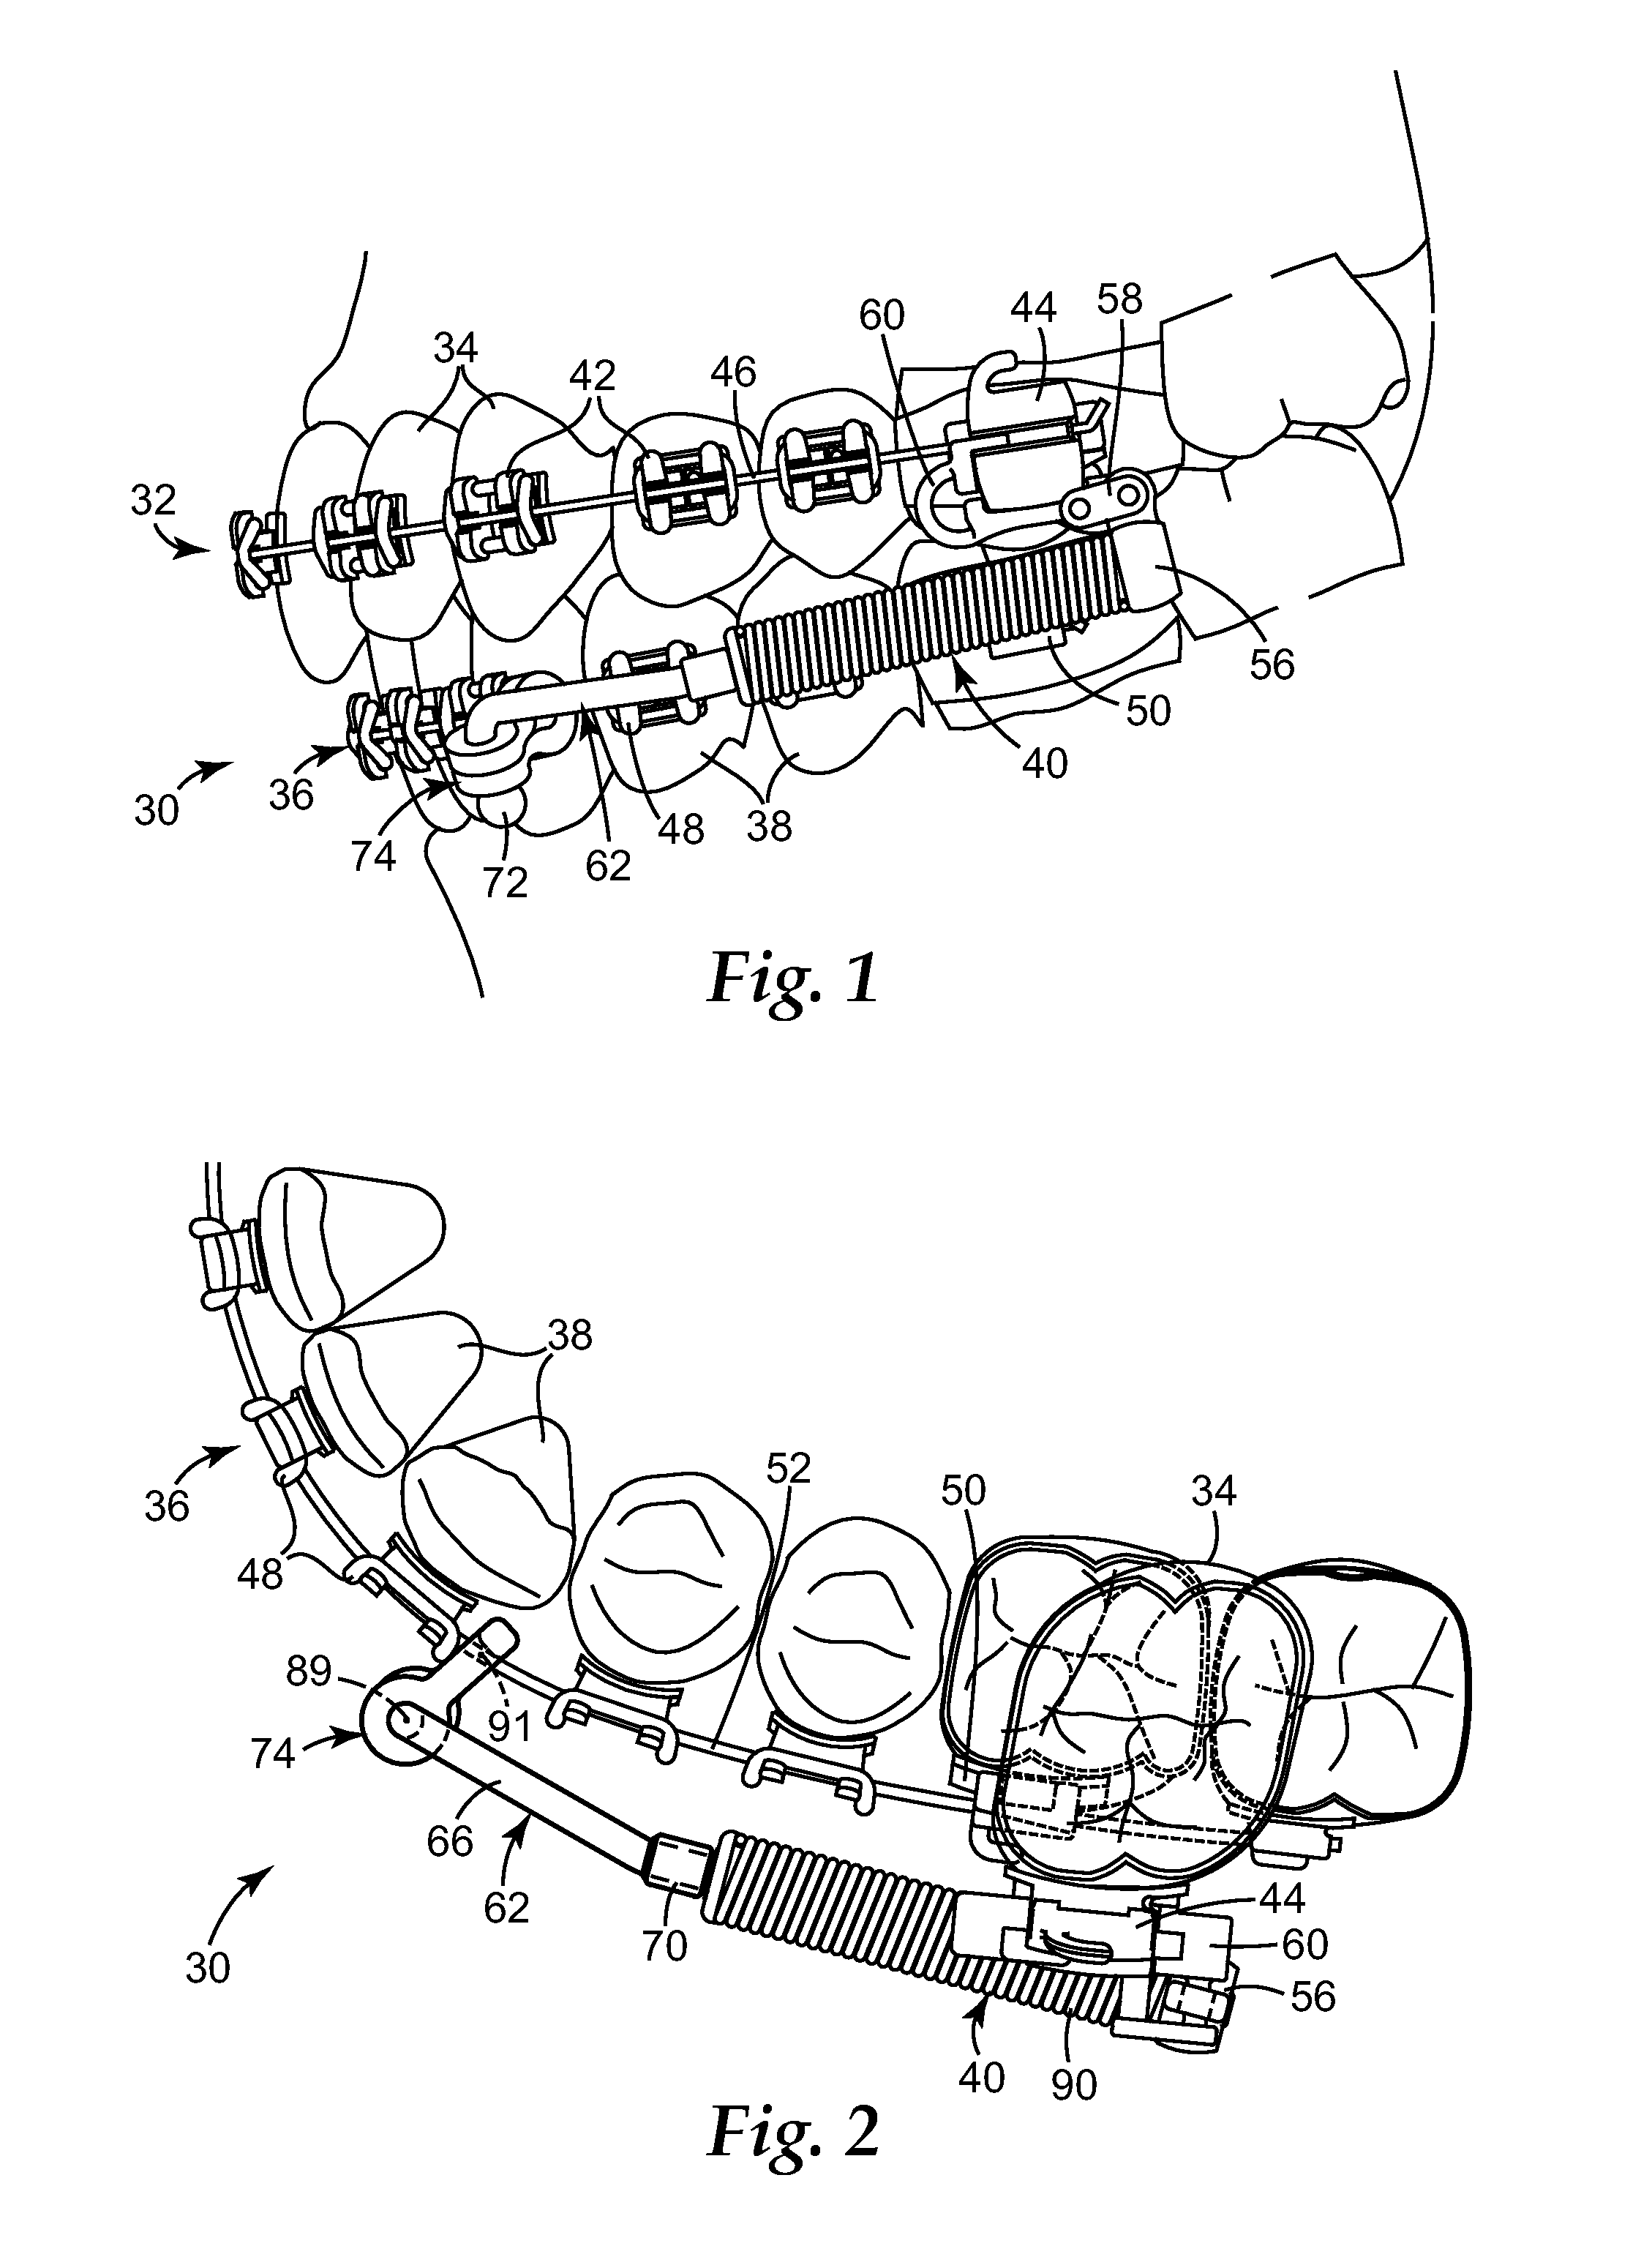 Interarch force module with link for orthodontic treatment